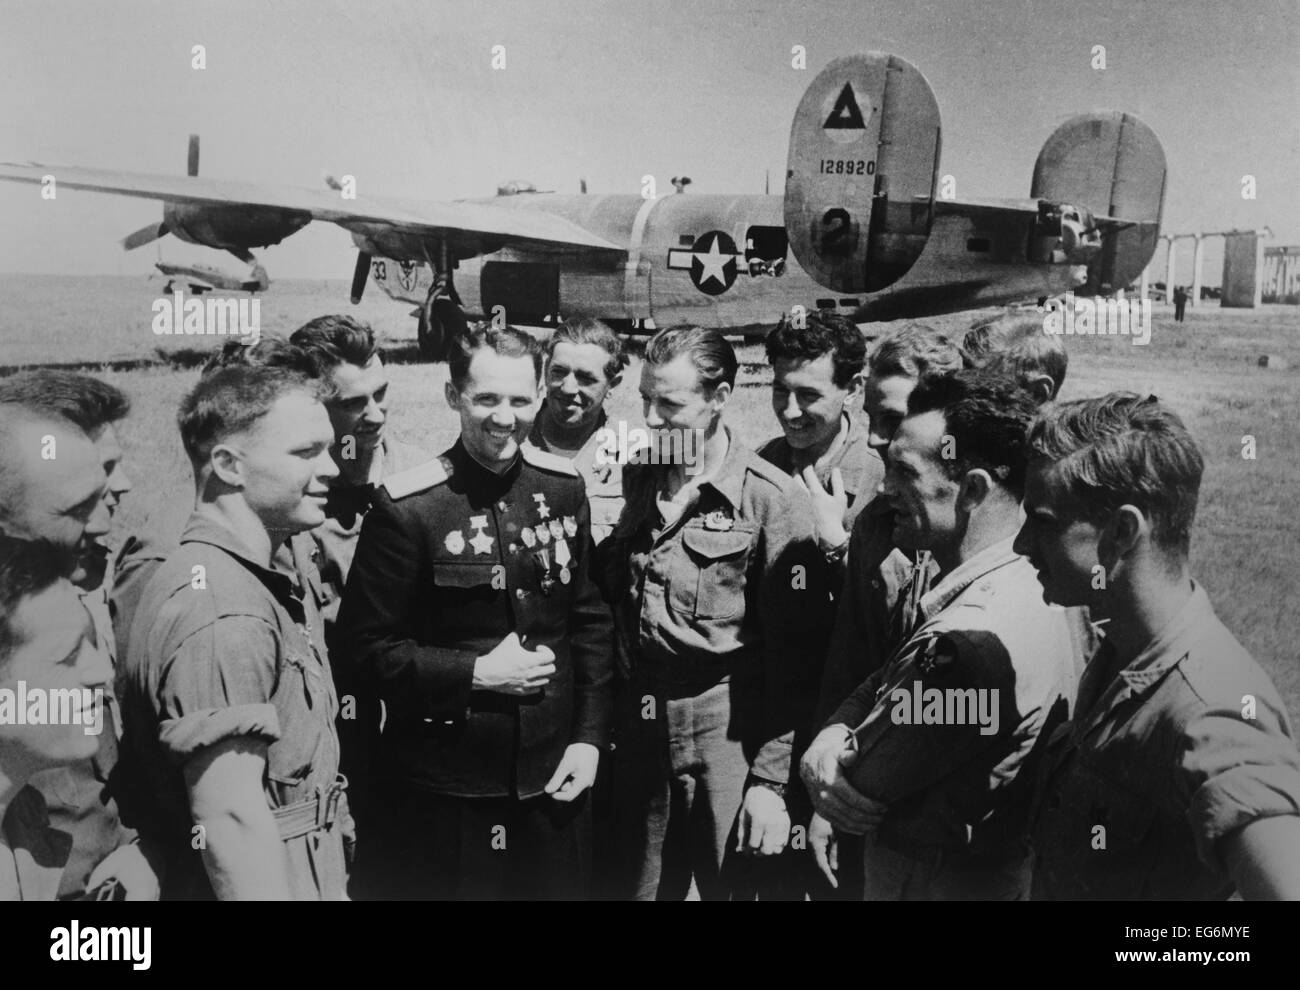 Soviet (Russian) World War 2 ace Mikhail Avdeev with American pilots. In the background is a Consolidated B-24 Liberator Stock Photo